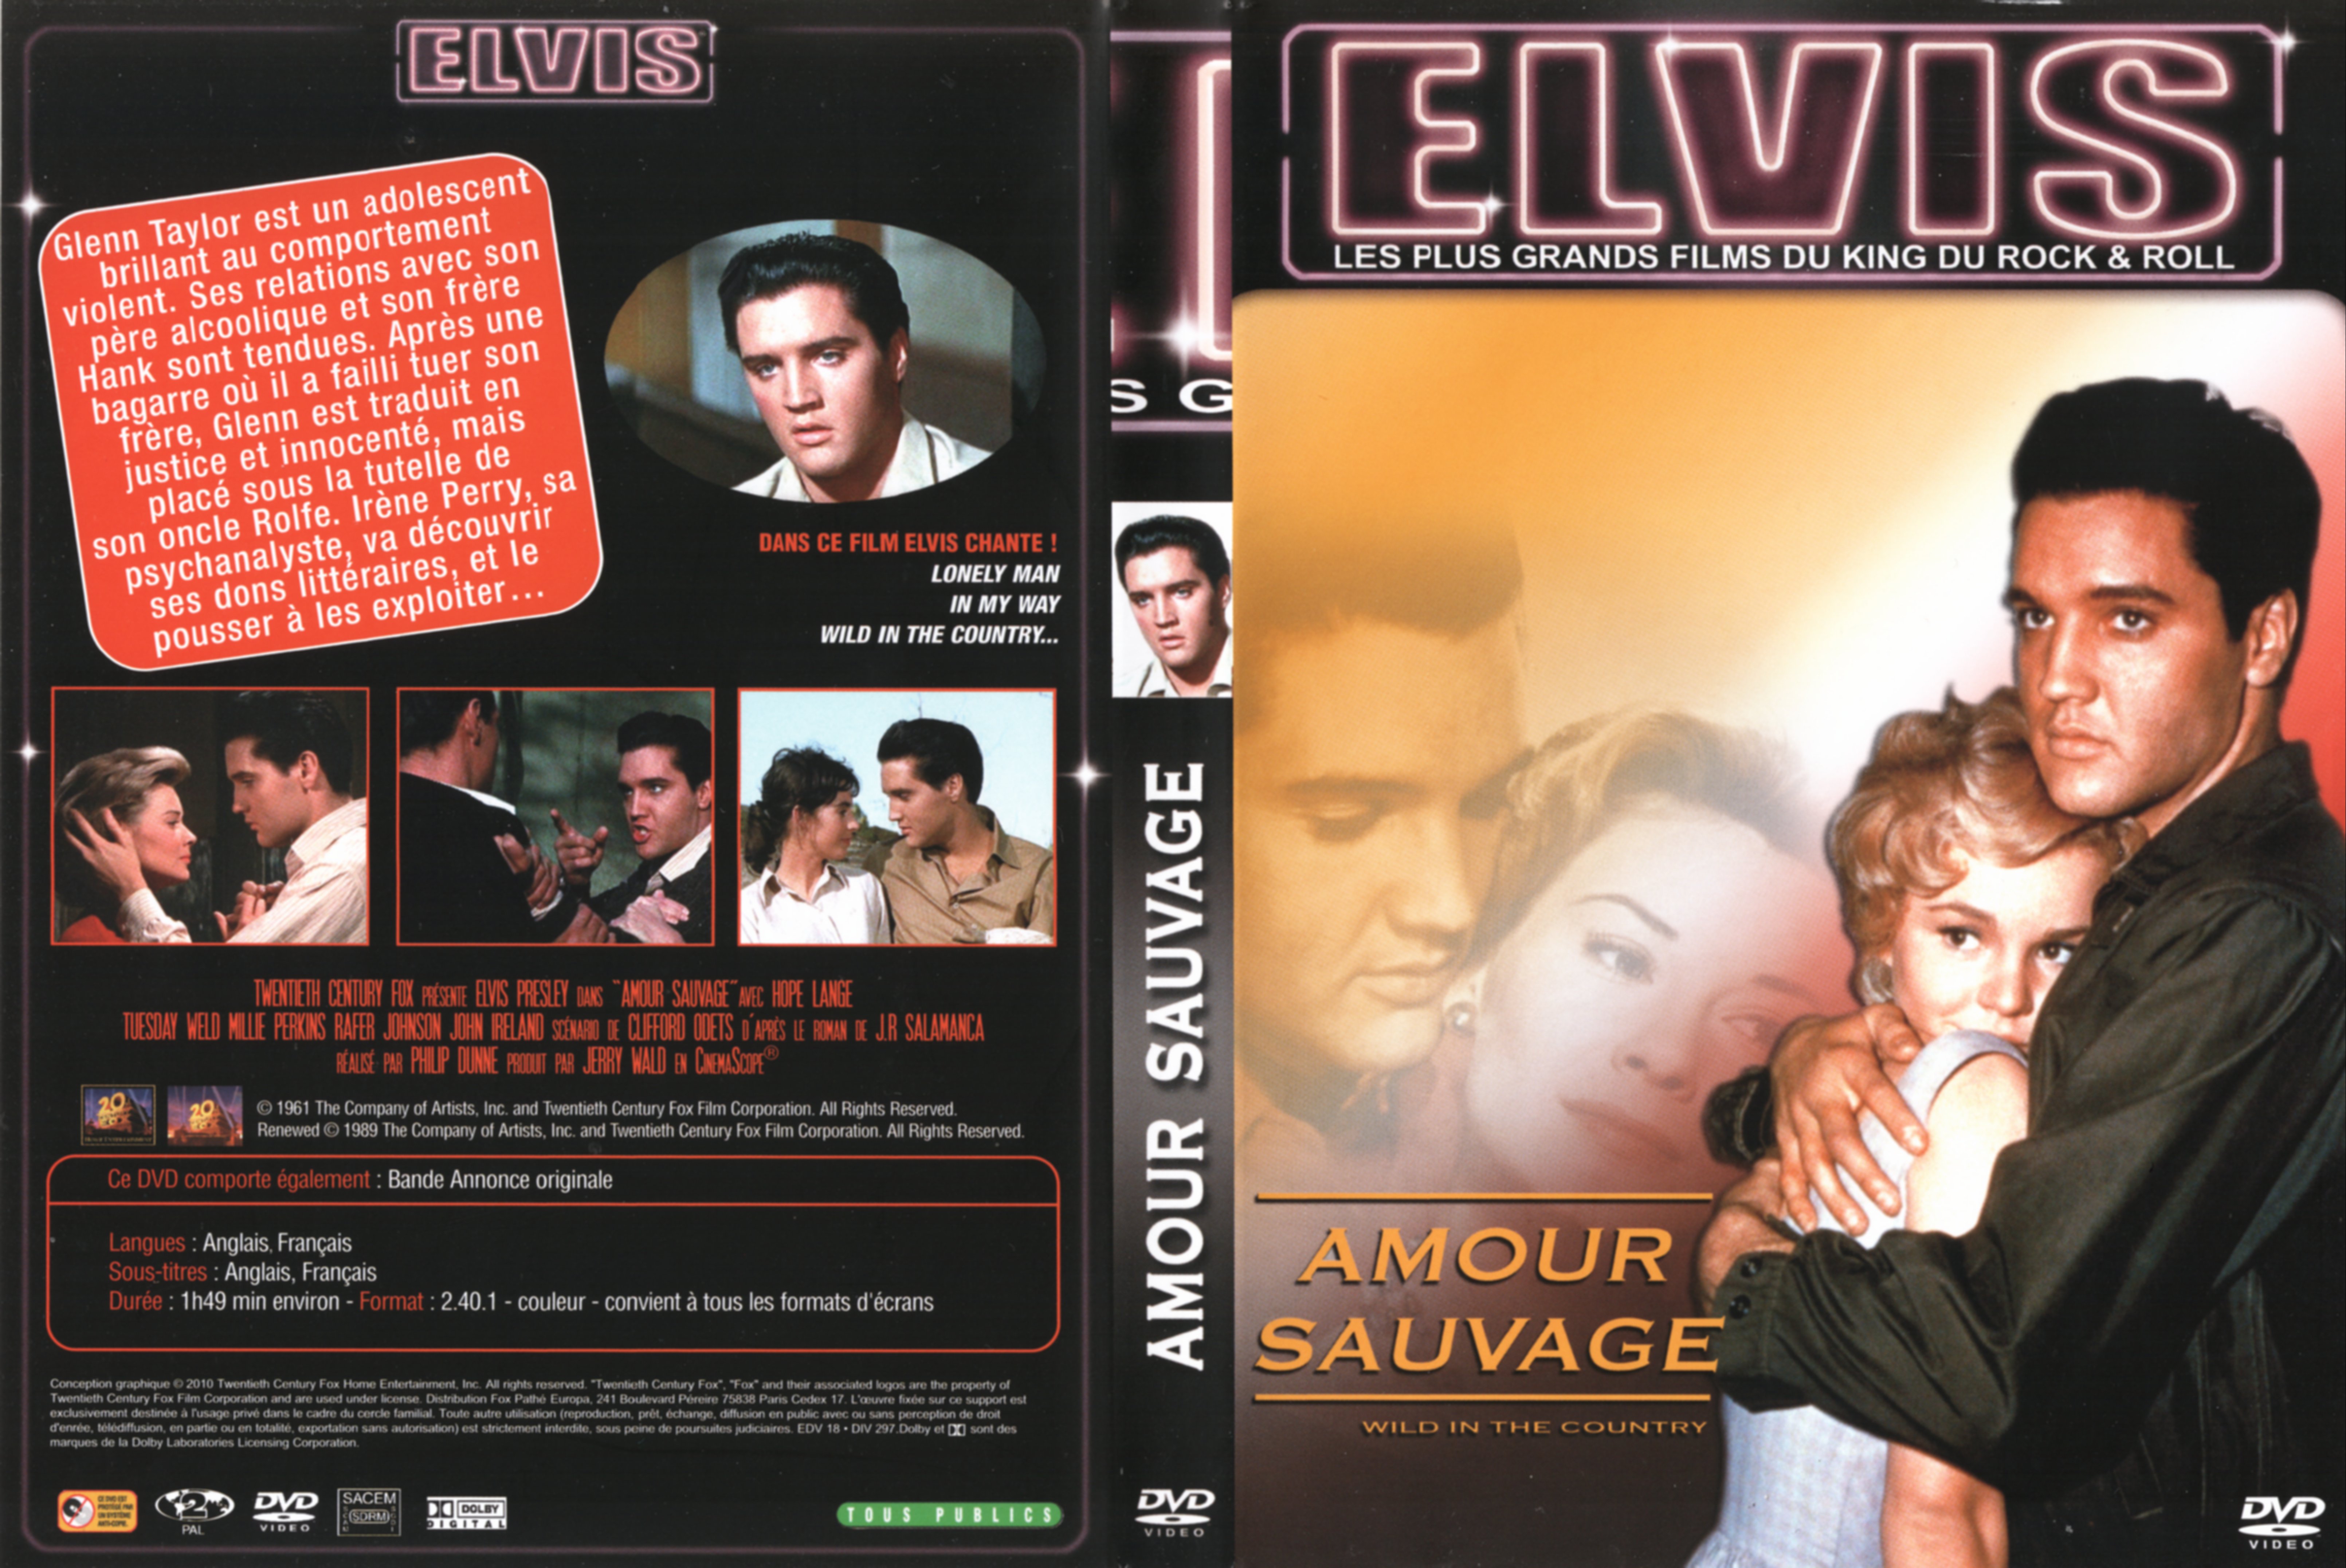 Jaquette DVD Amour sauvage v2